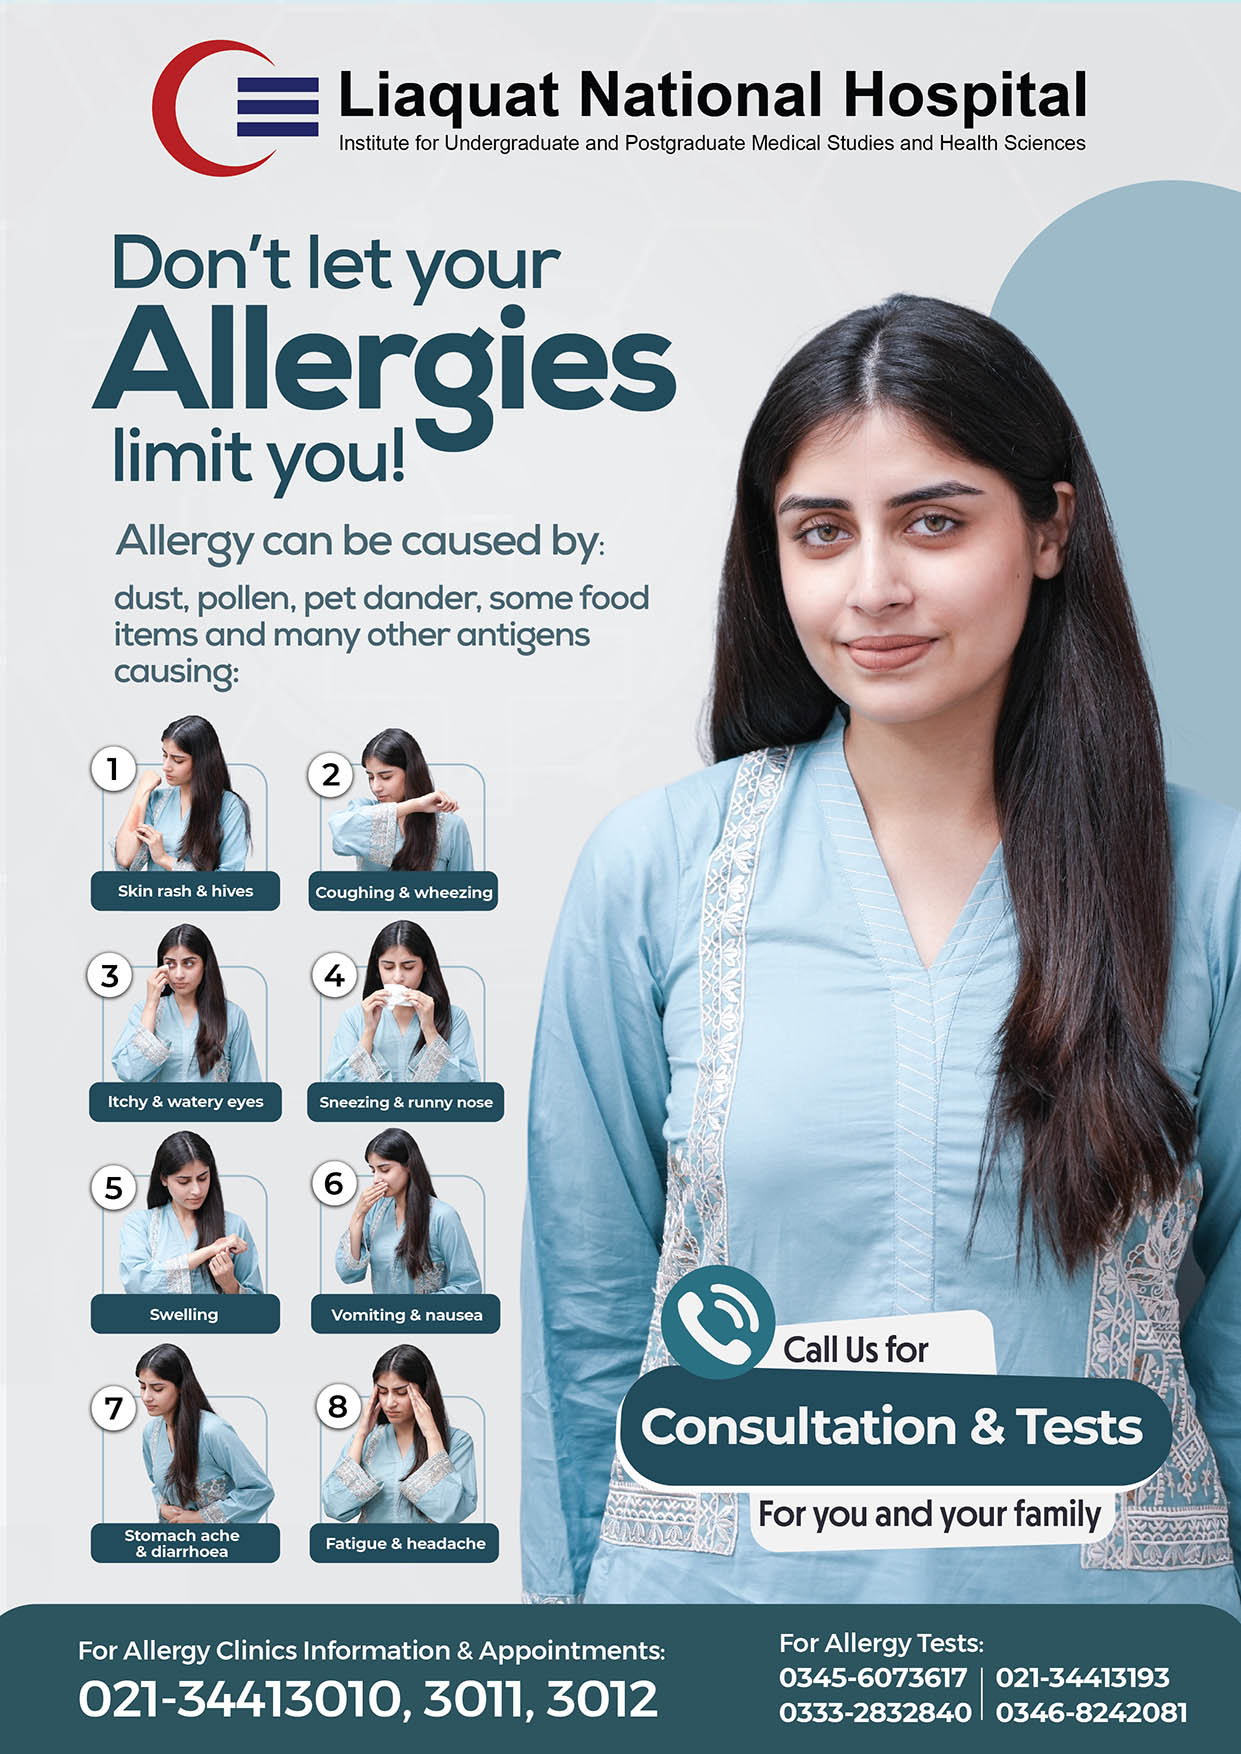 Allergy Tests and Clinics have been Started at Liaquat National Hospital